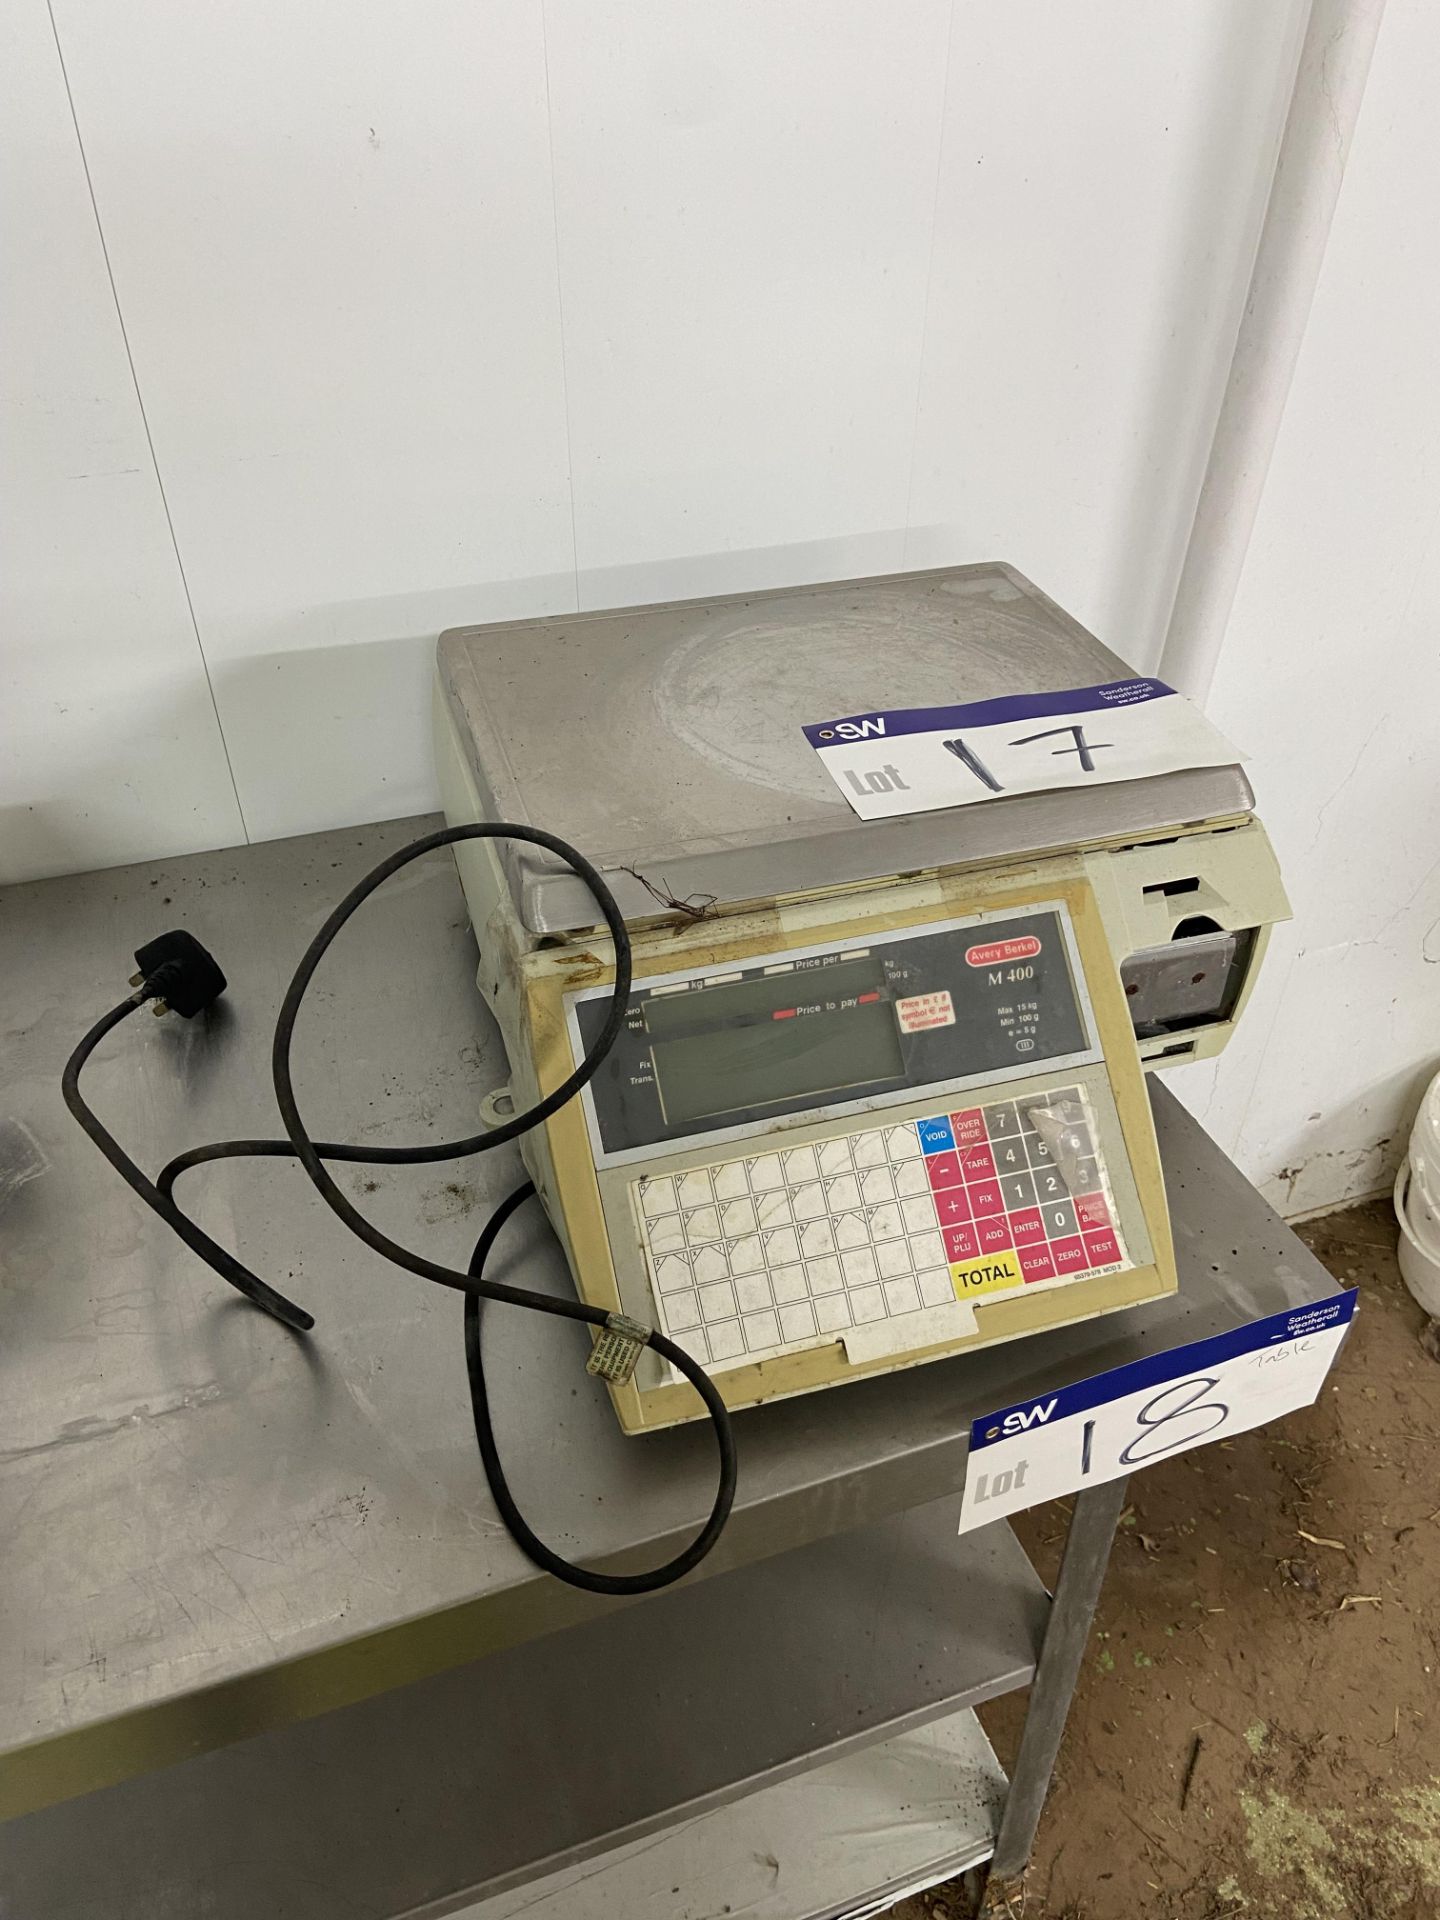 Avery Berkel M400 Bench Top Weighing Machine, 15kg max., with display to both sides (please note